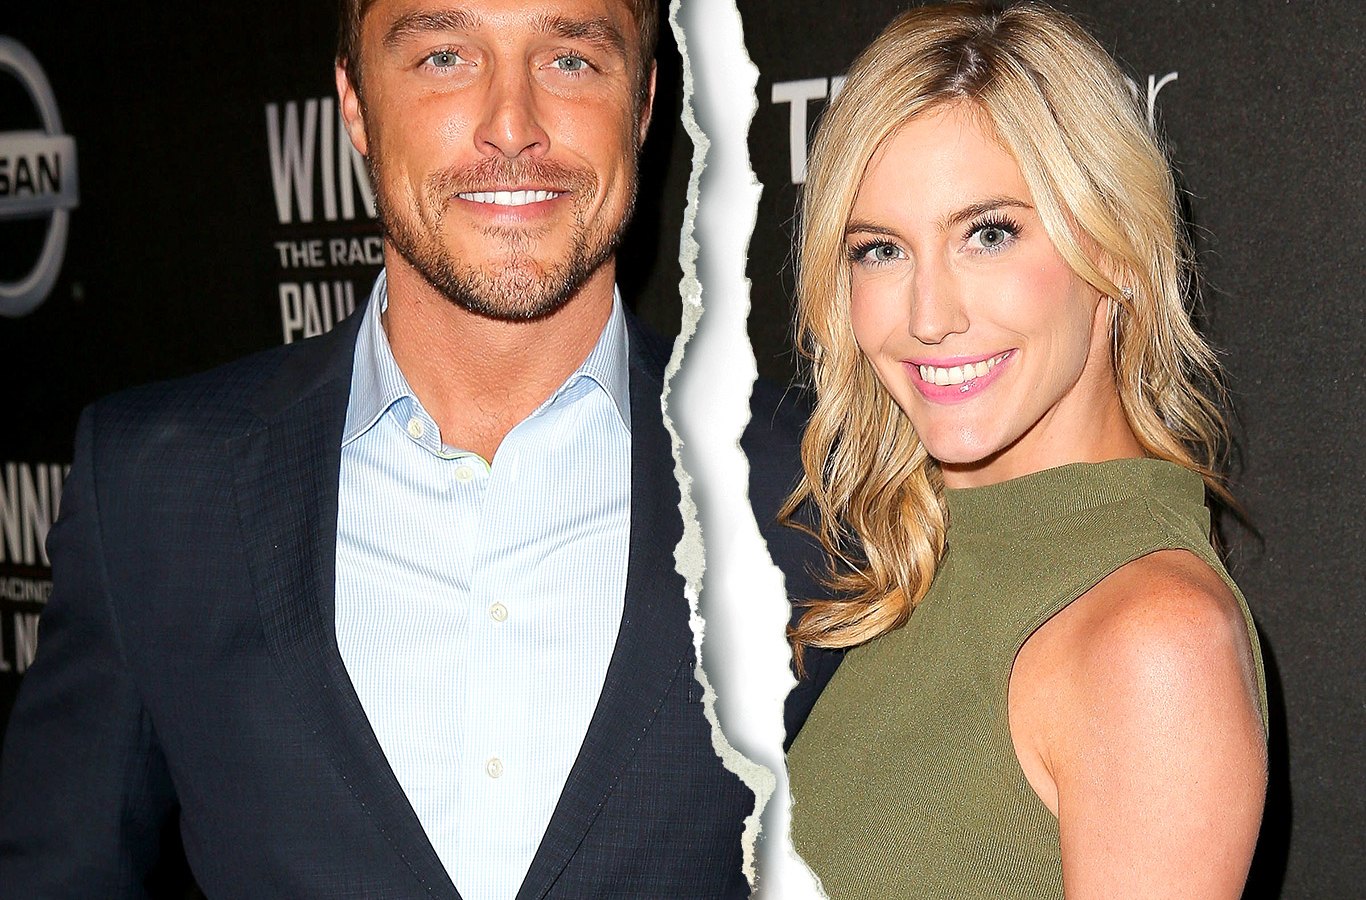 Chris Soules and Whitney